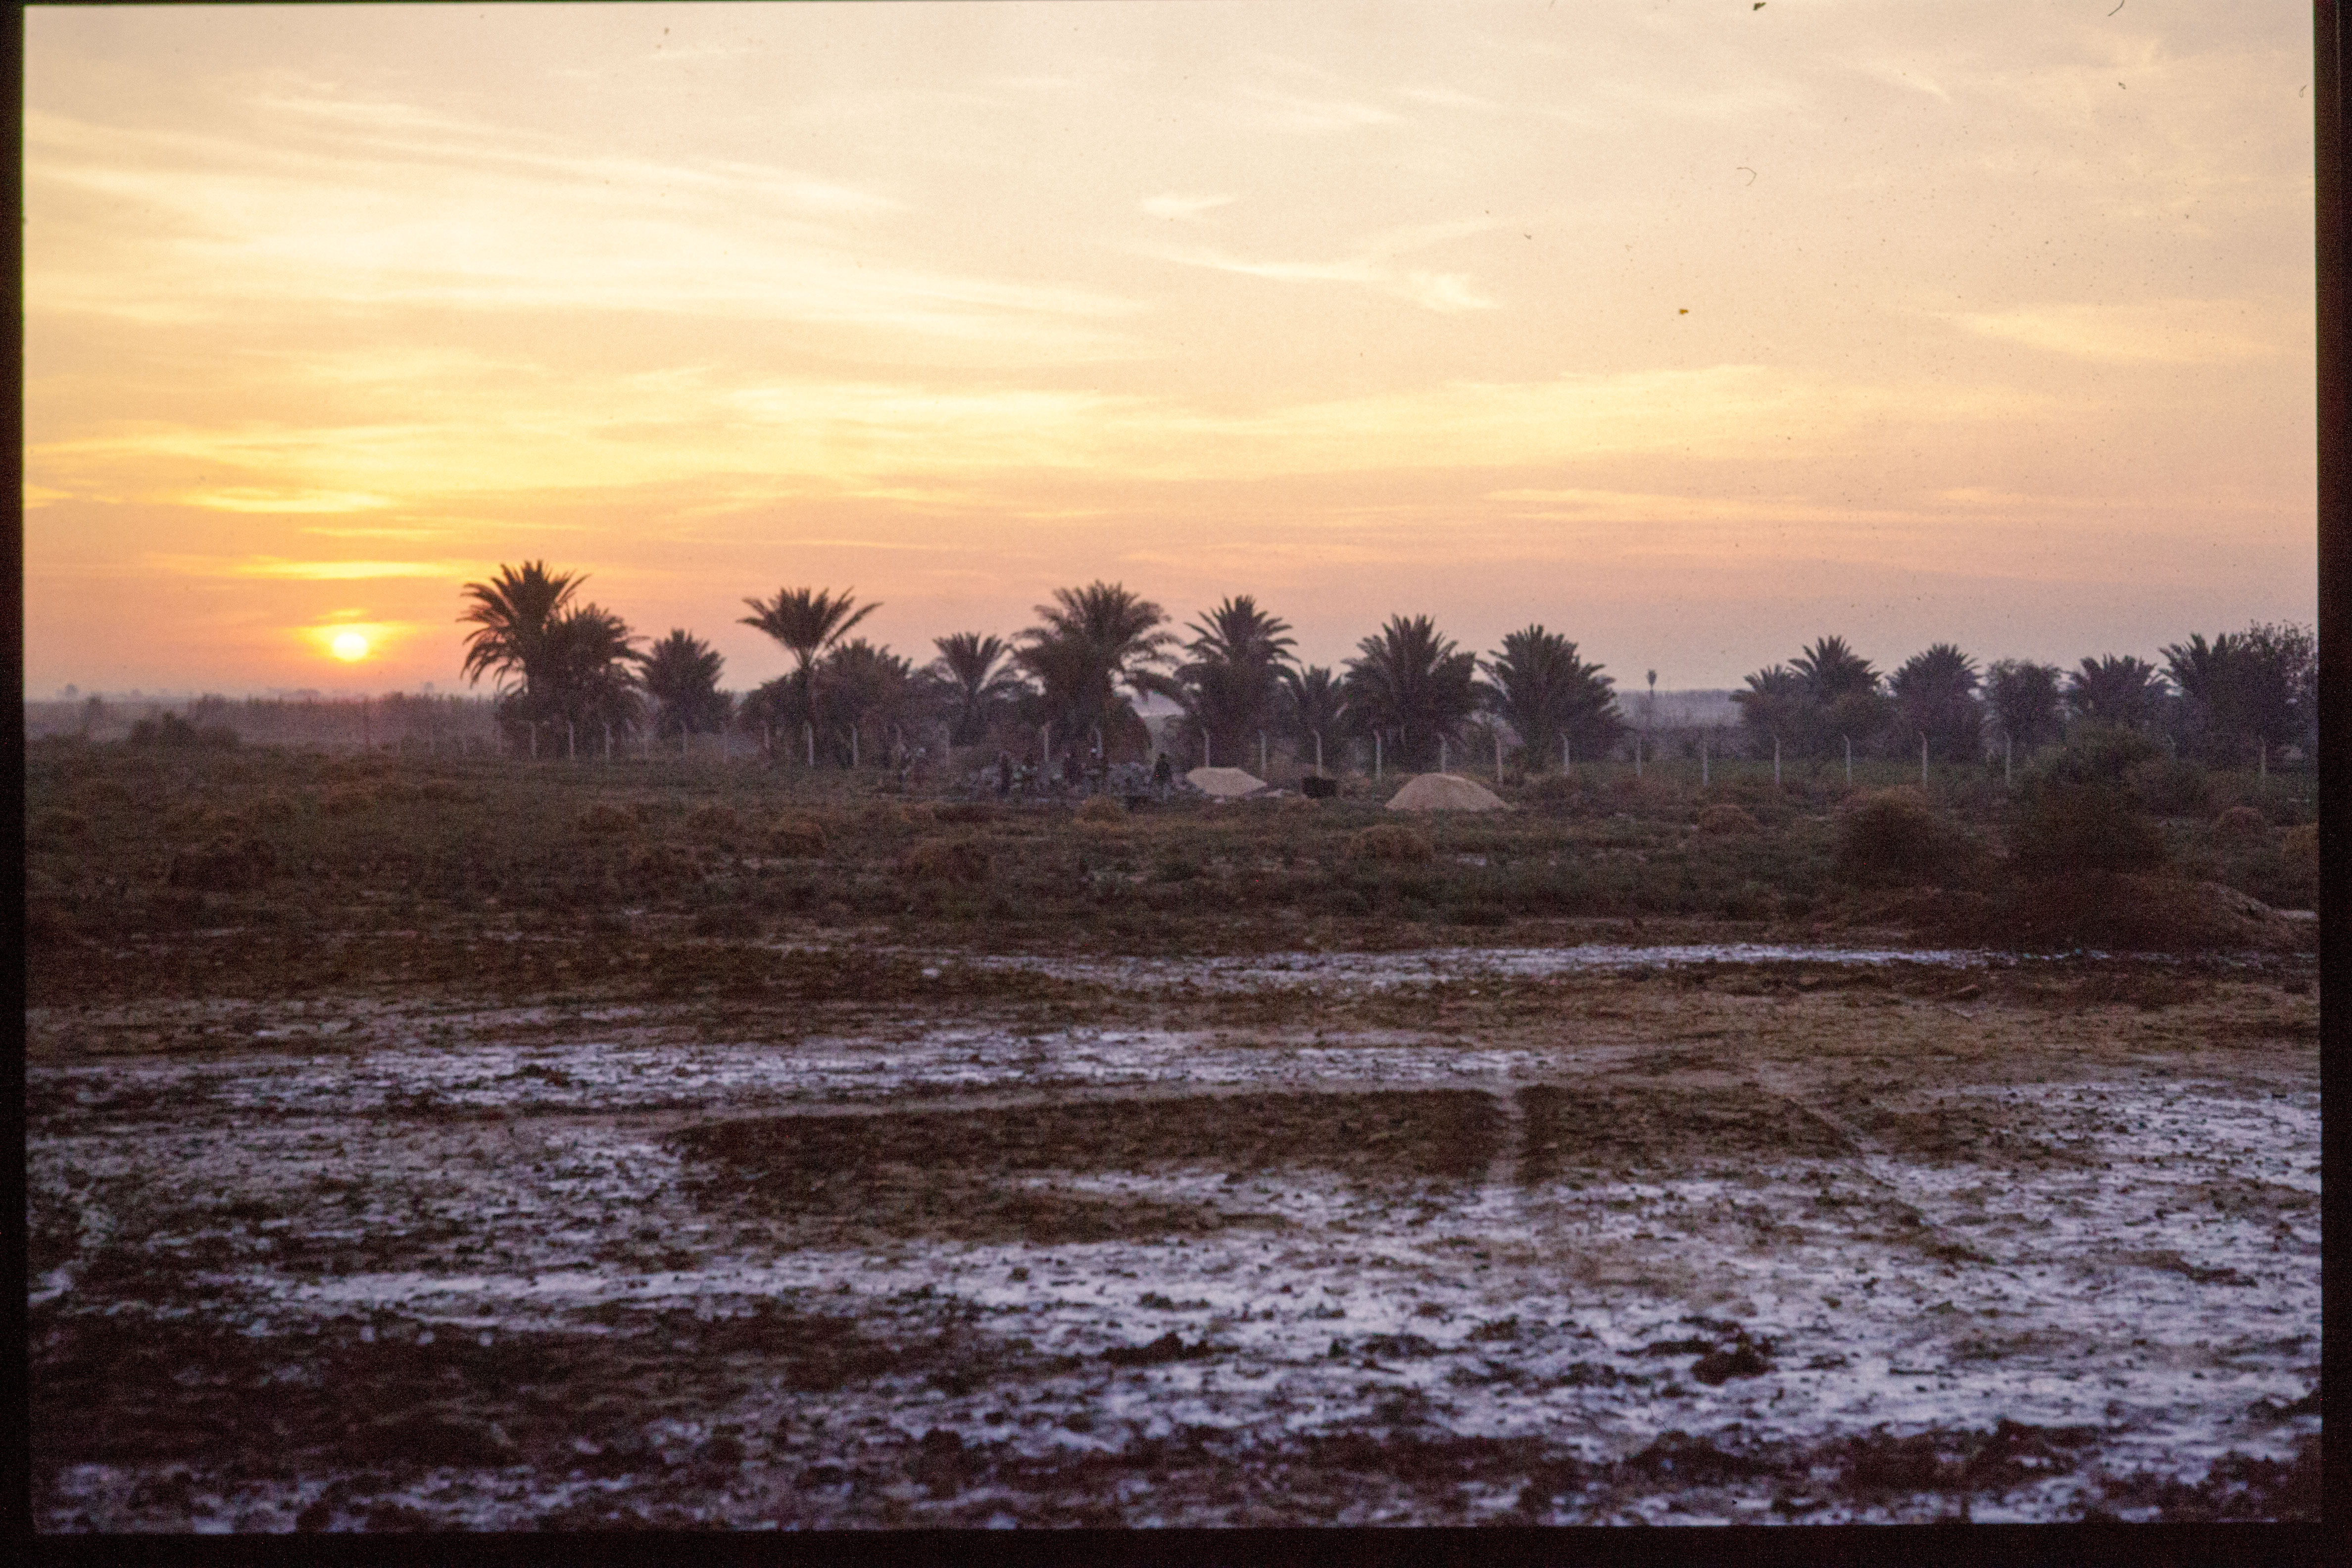 View of excavation area at sunrise